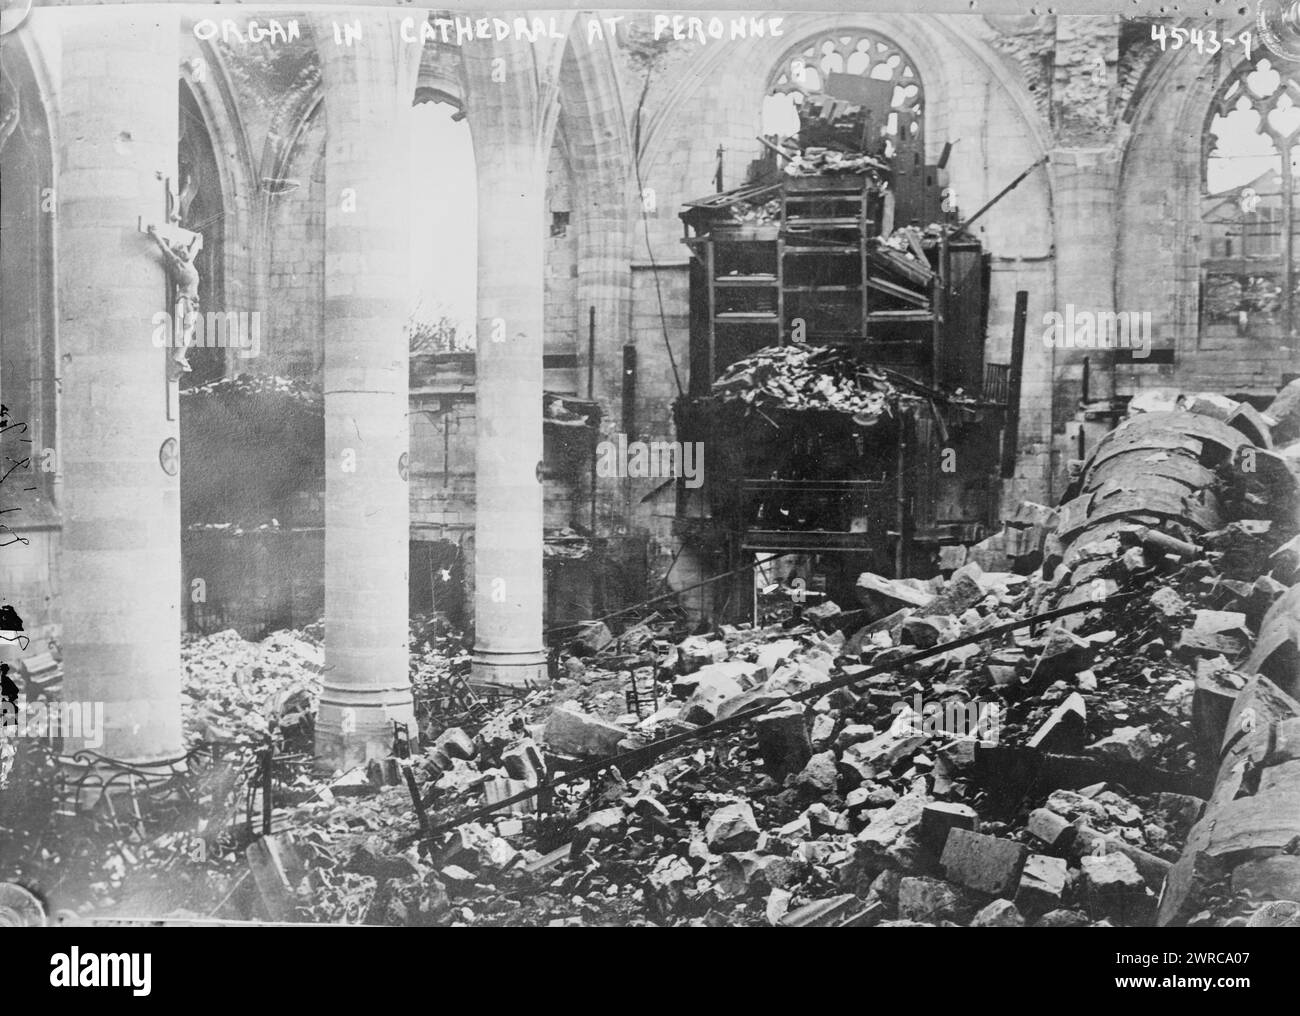 Organ in cathedral at Peronne, Photograph shows an organ in the ruins of the church of Saint-Jean-Baptiste de Péronne in Péronne, France during World War I., between ca. 1915 and 1918, World War, 1914-1918, Glass negatives, 1 negative: glass Stock Photo